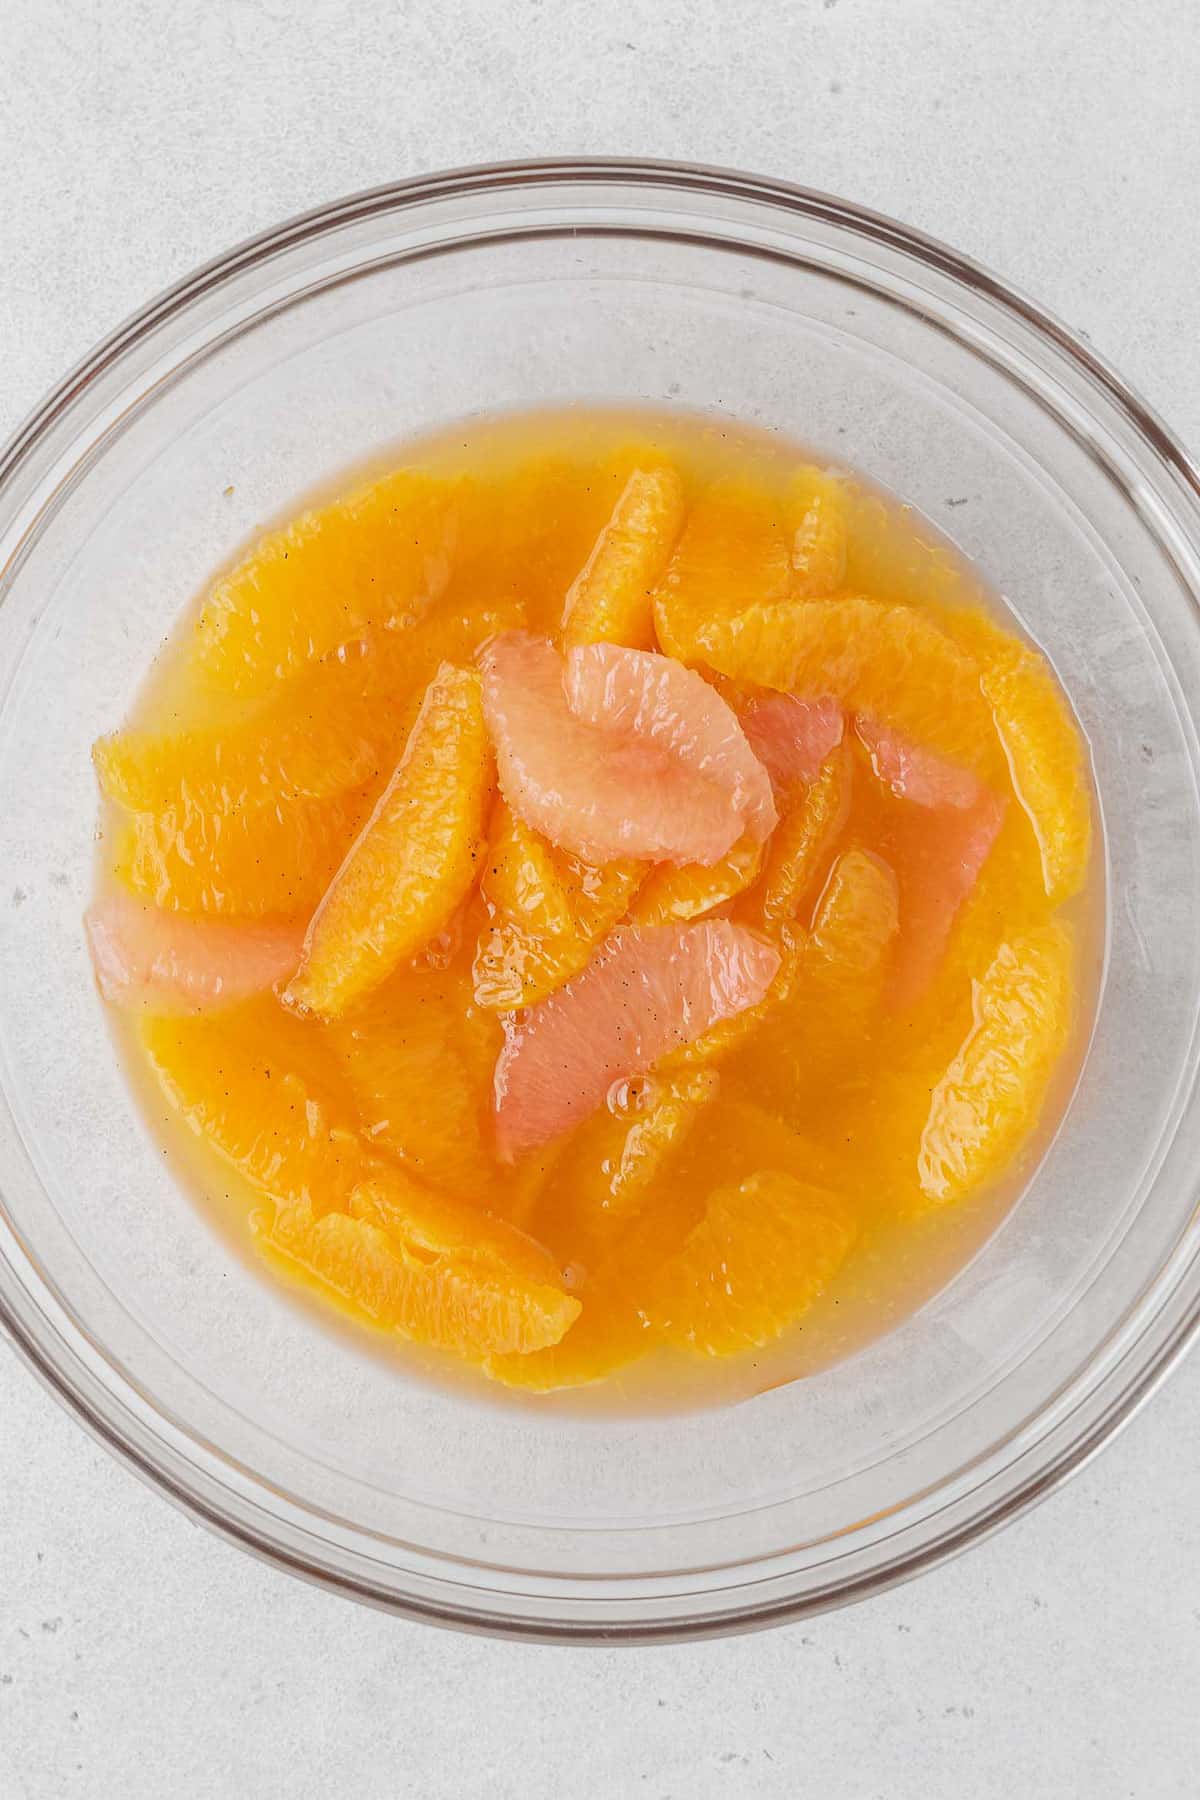 Orange and pink grapefruit segments in a glass bowl of syrup.